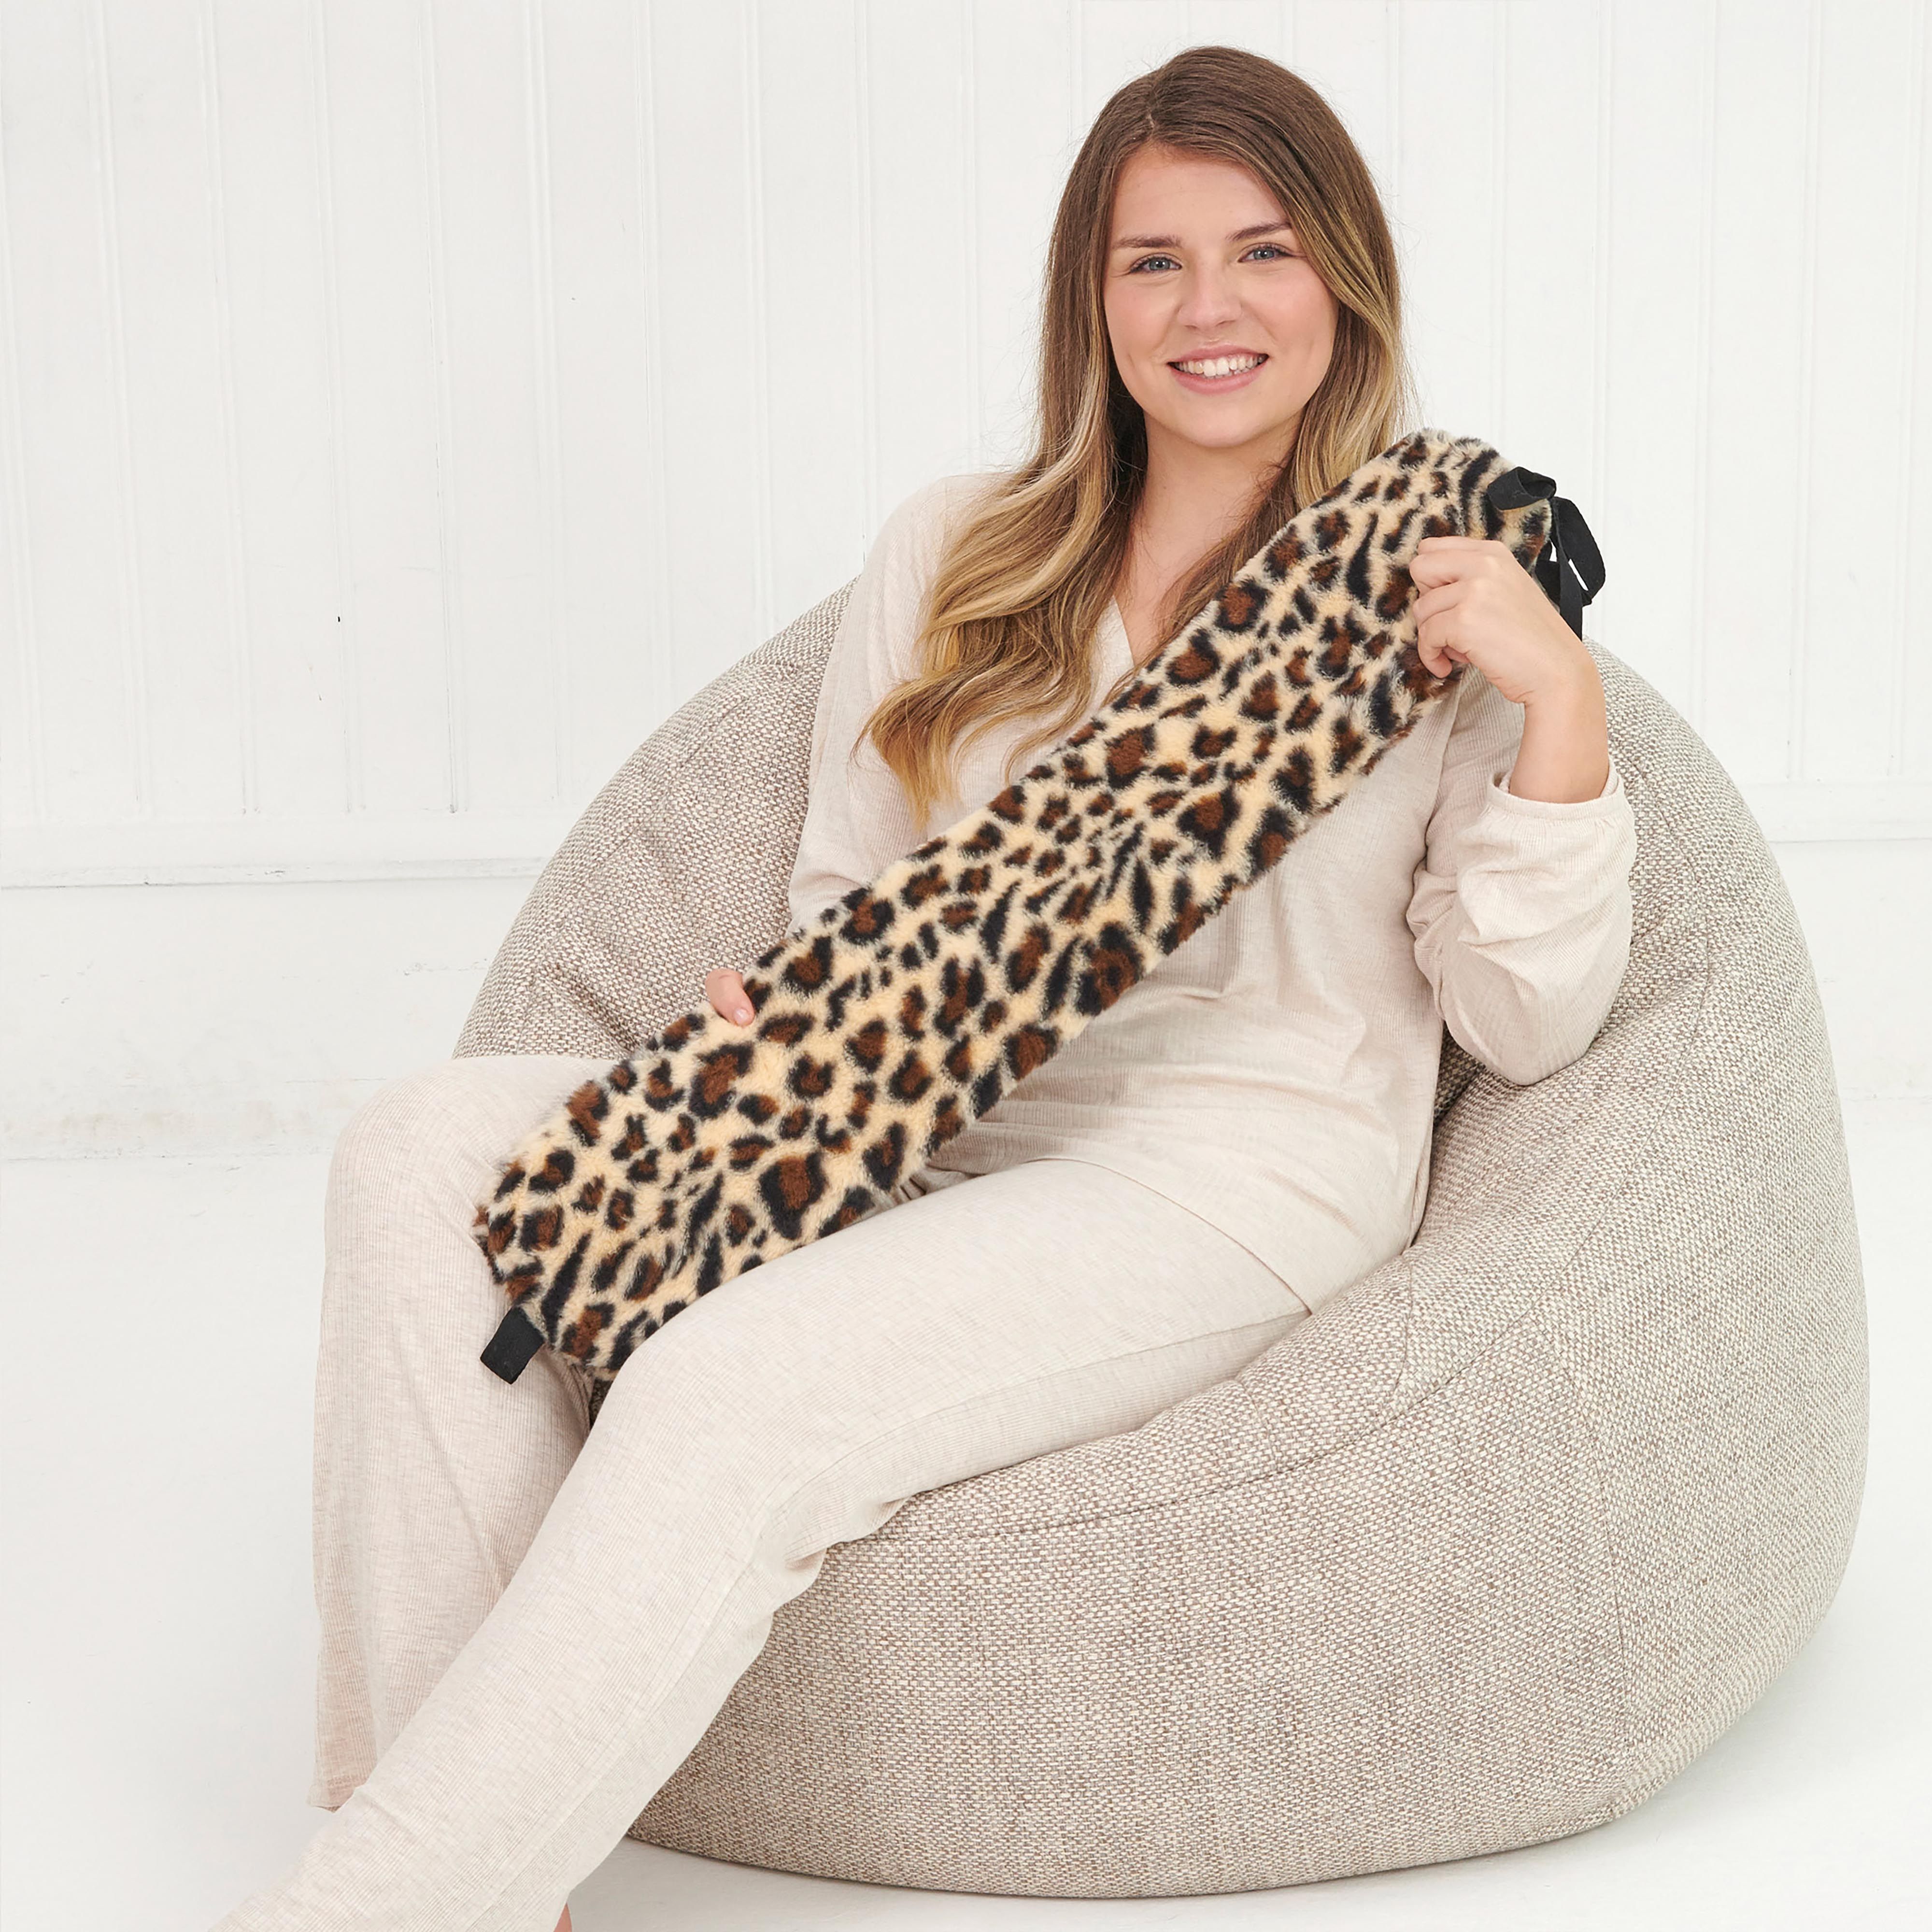 Long Hot Water Bottle - Leopard Print Faux Fur-Beauty & Well-Being-Aroma Home-The Bay Room